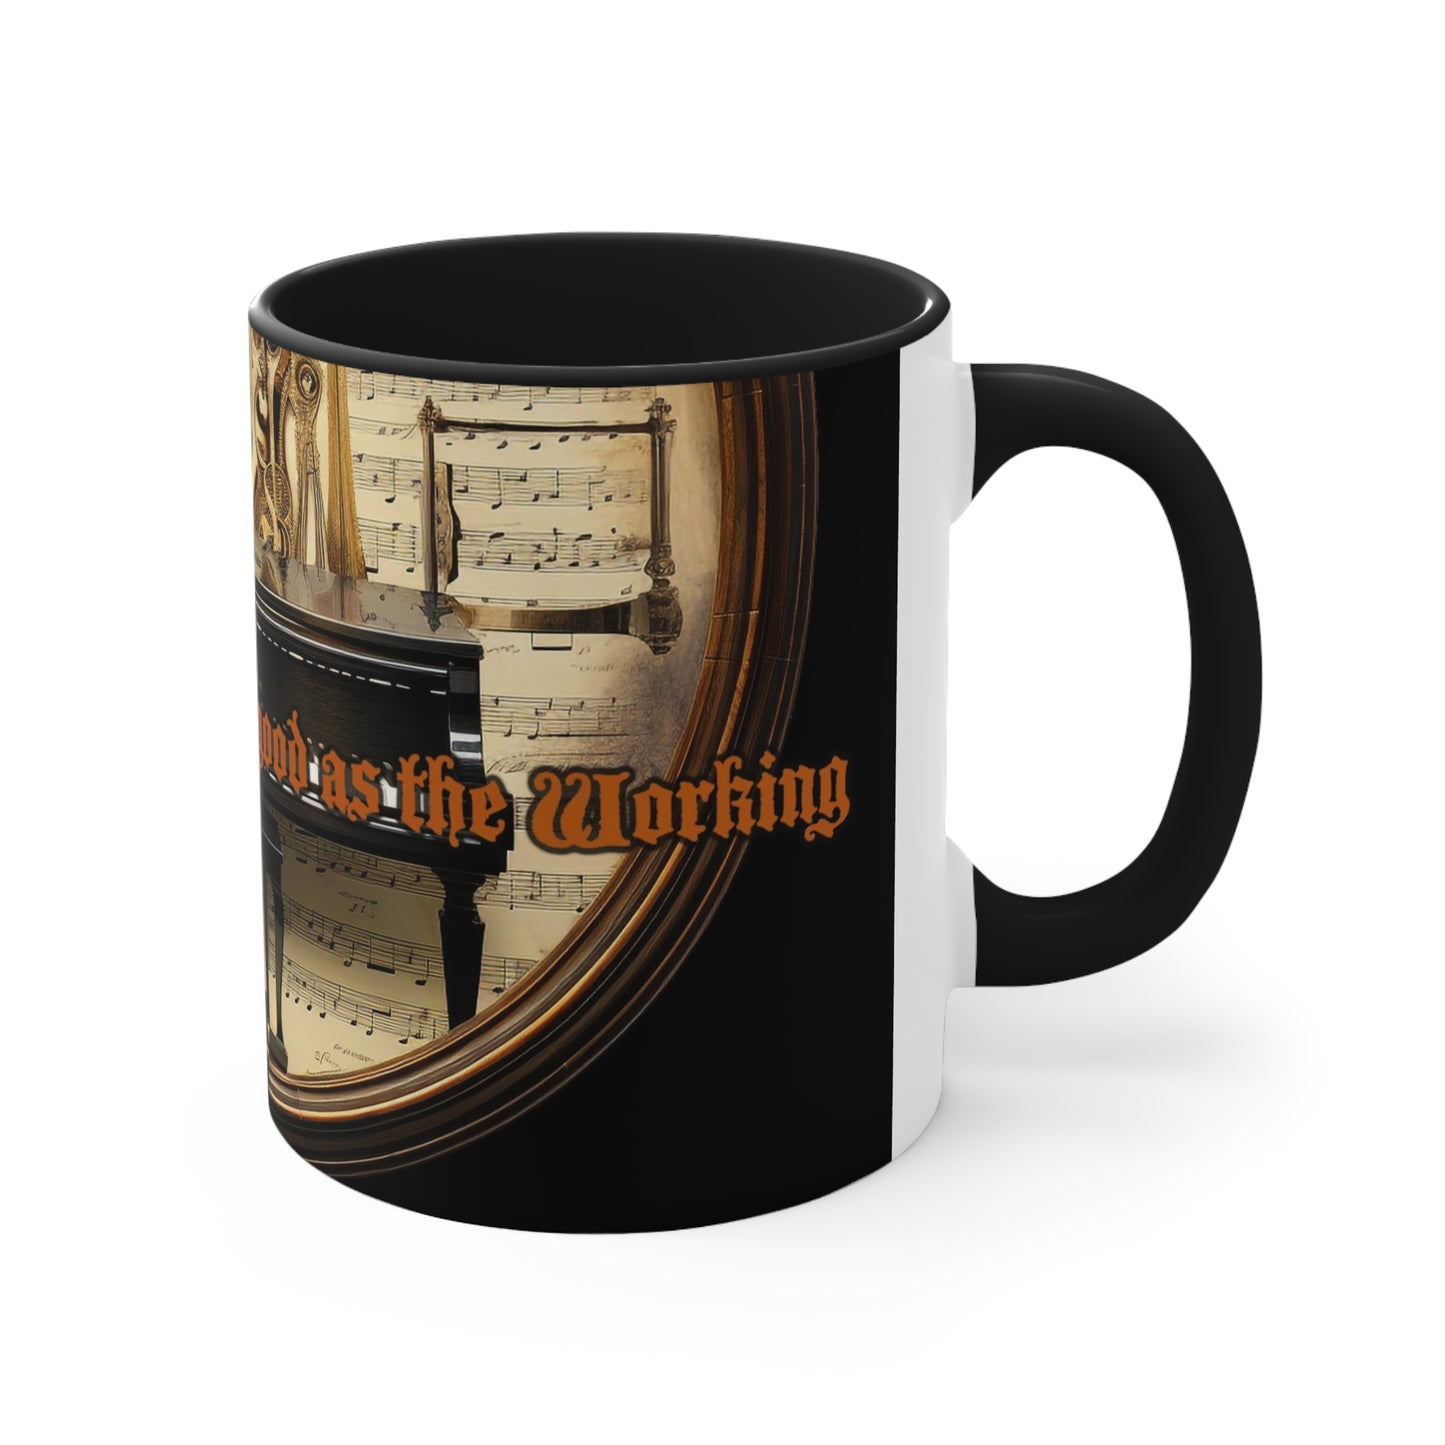 The PLAYING is Only as Good as the WORKING, Piano Coffee Mug, 11oz, black Retro Surrealistic design, gift for Musicians, Piano Players